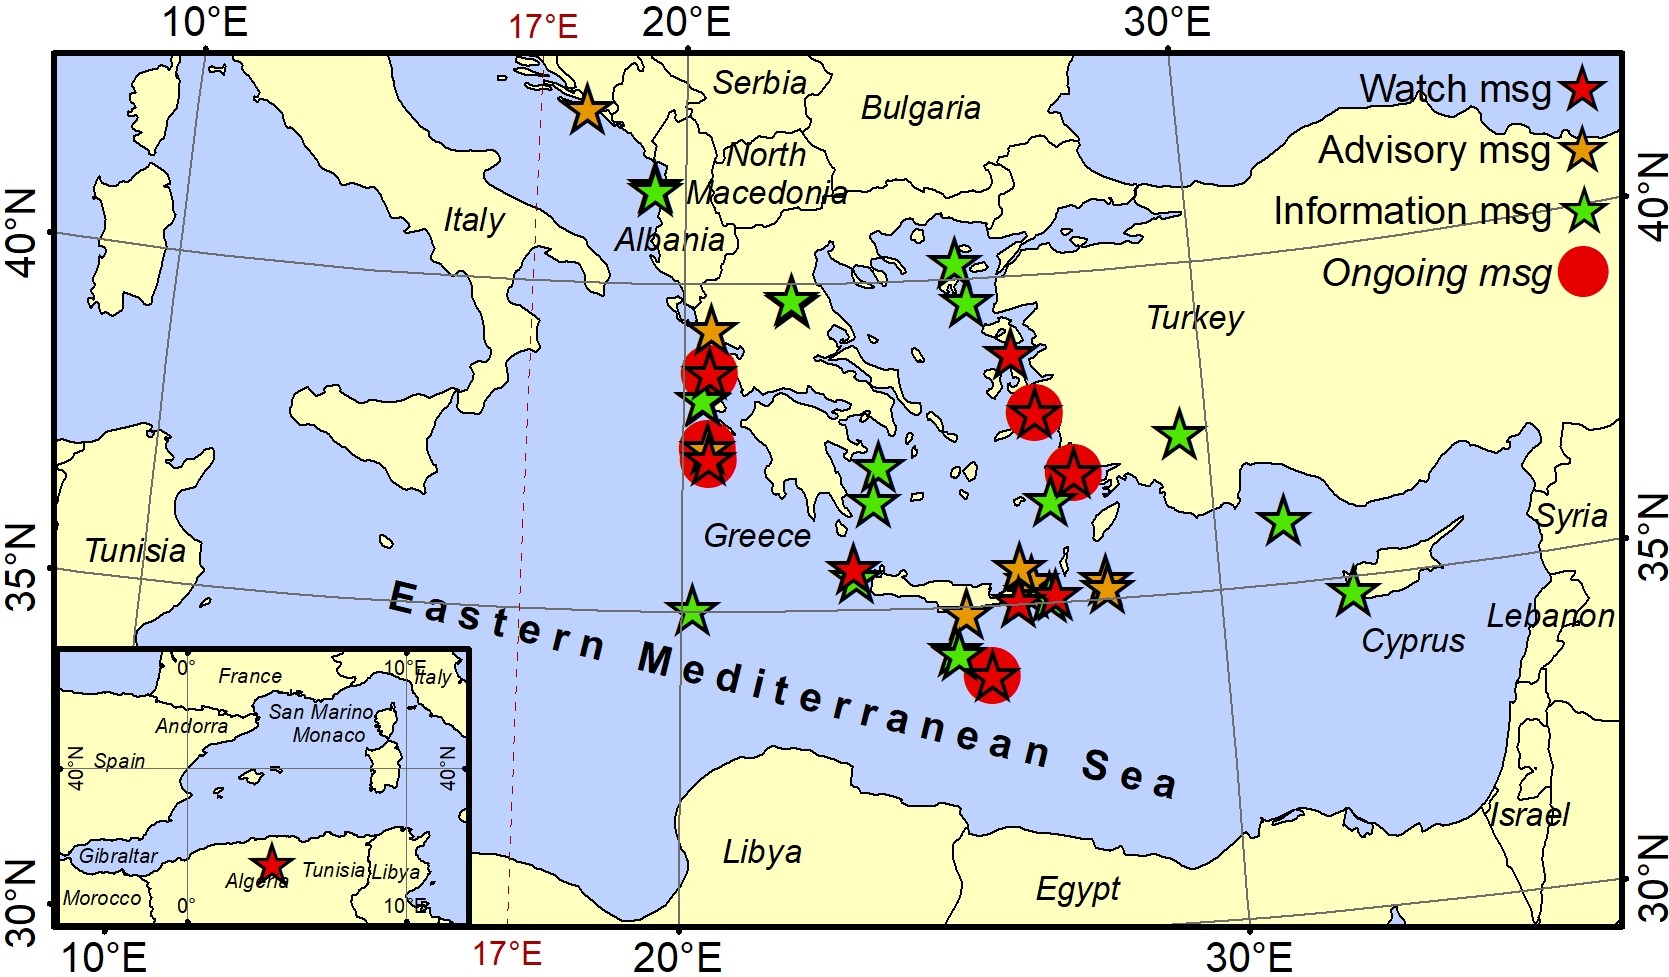 Epicenters of earthquakes for which HL-NTWC has issued tsunami warning messages (until May 2021)